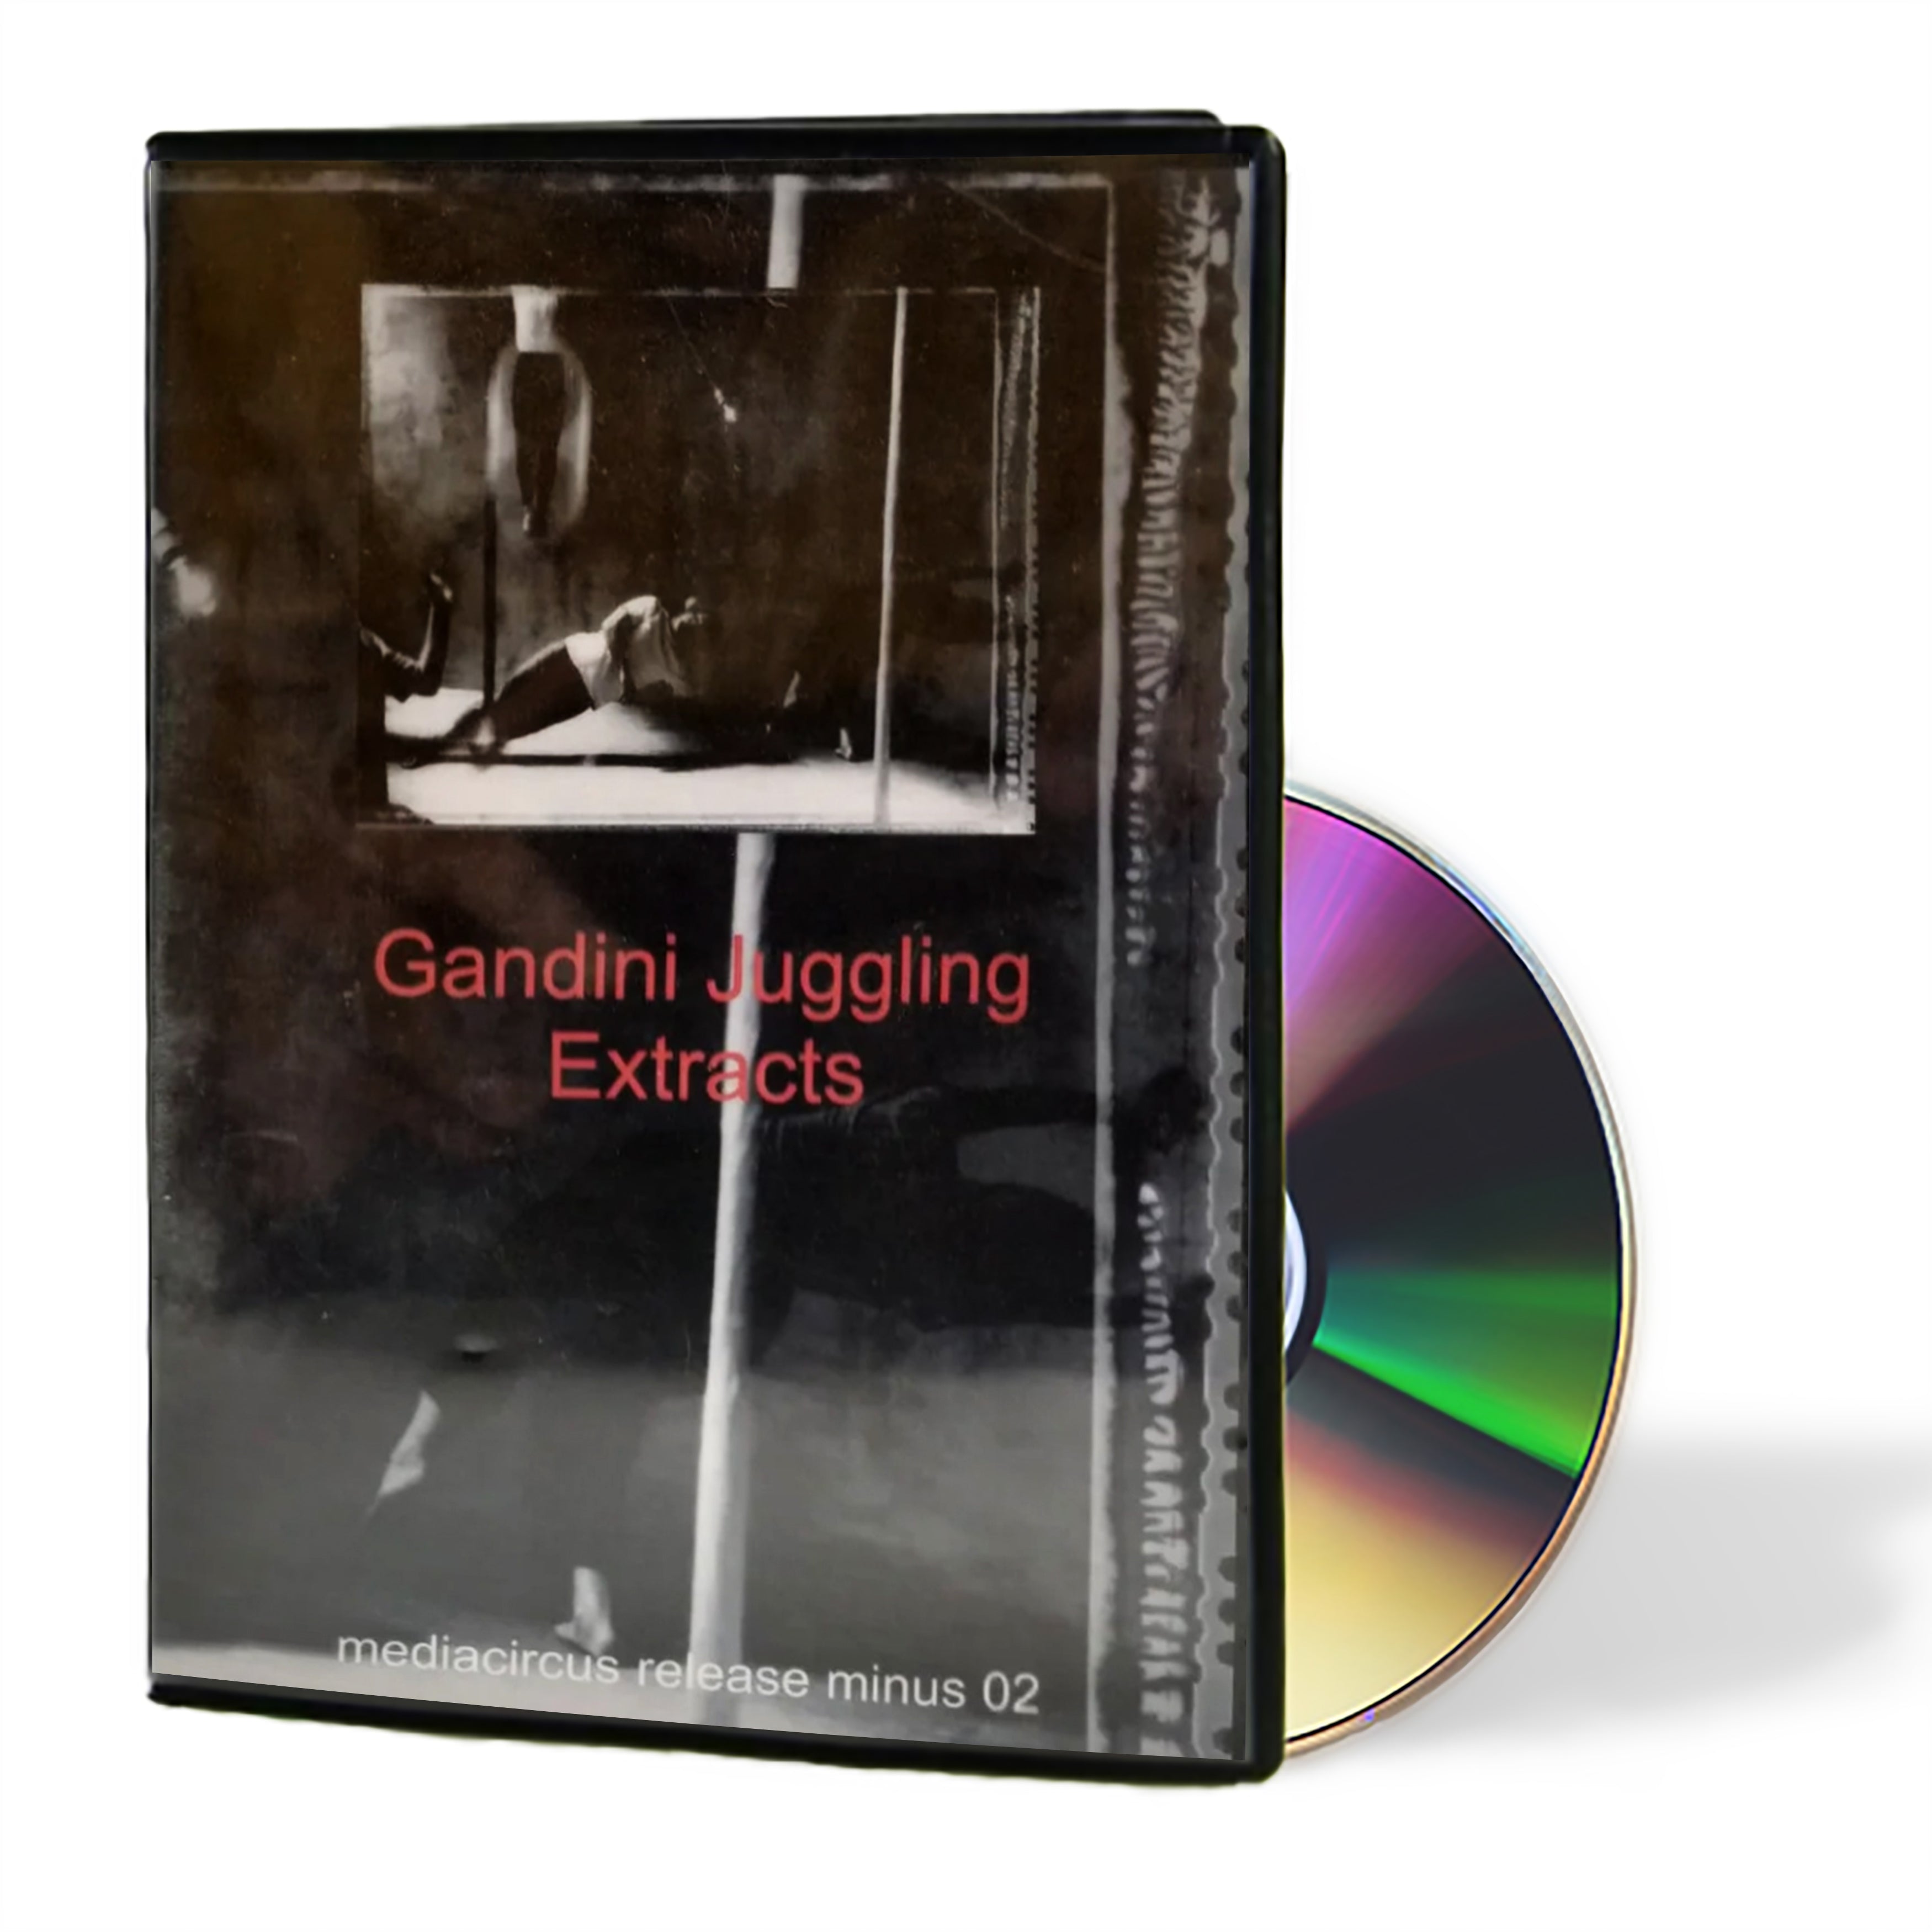 Gandini Juggling Extracts DVD